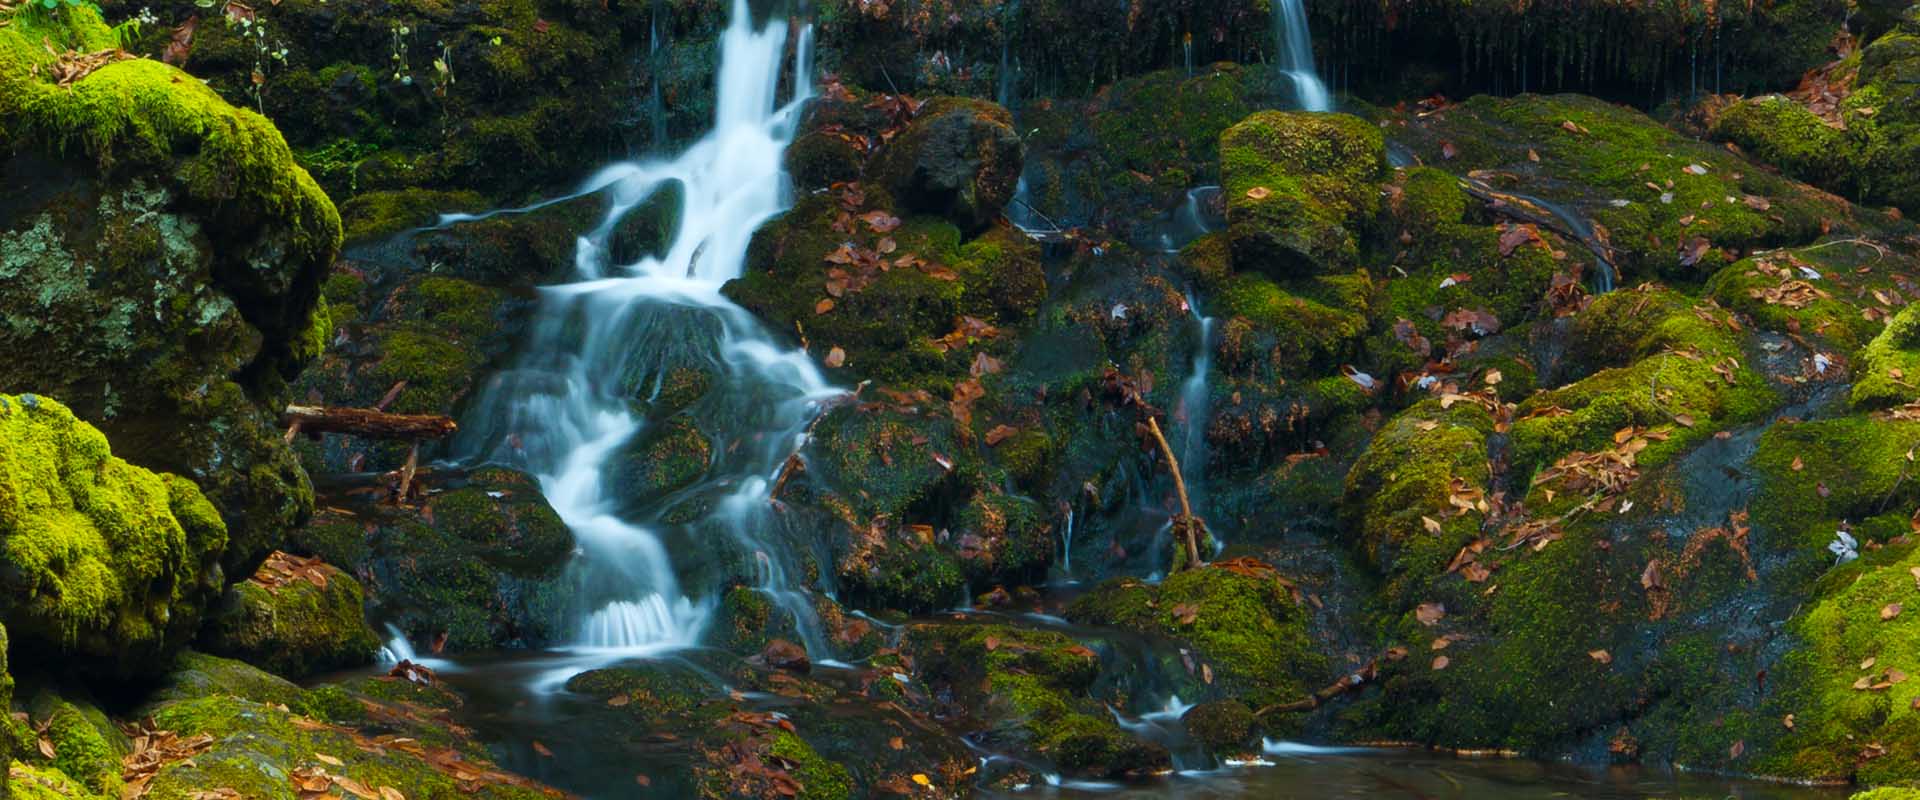 An image of a small waterfall flowing over moss-covered rocks, taken near Dickson Falls, Fundy National Park, Alma, New Brunswick.